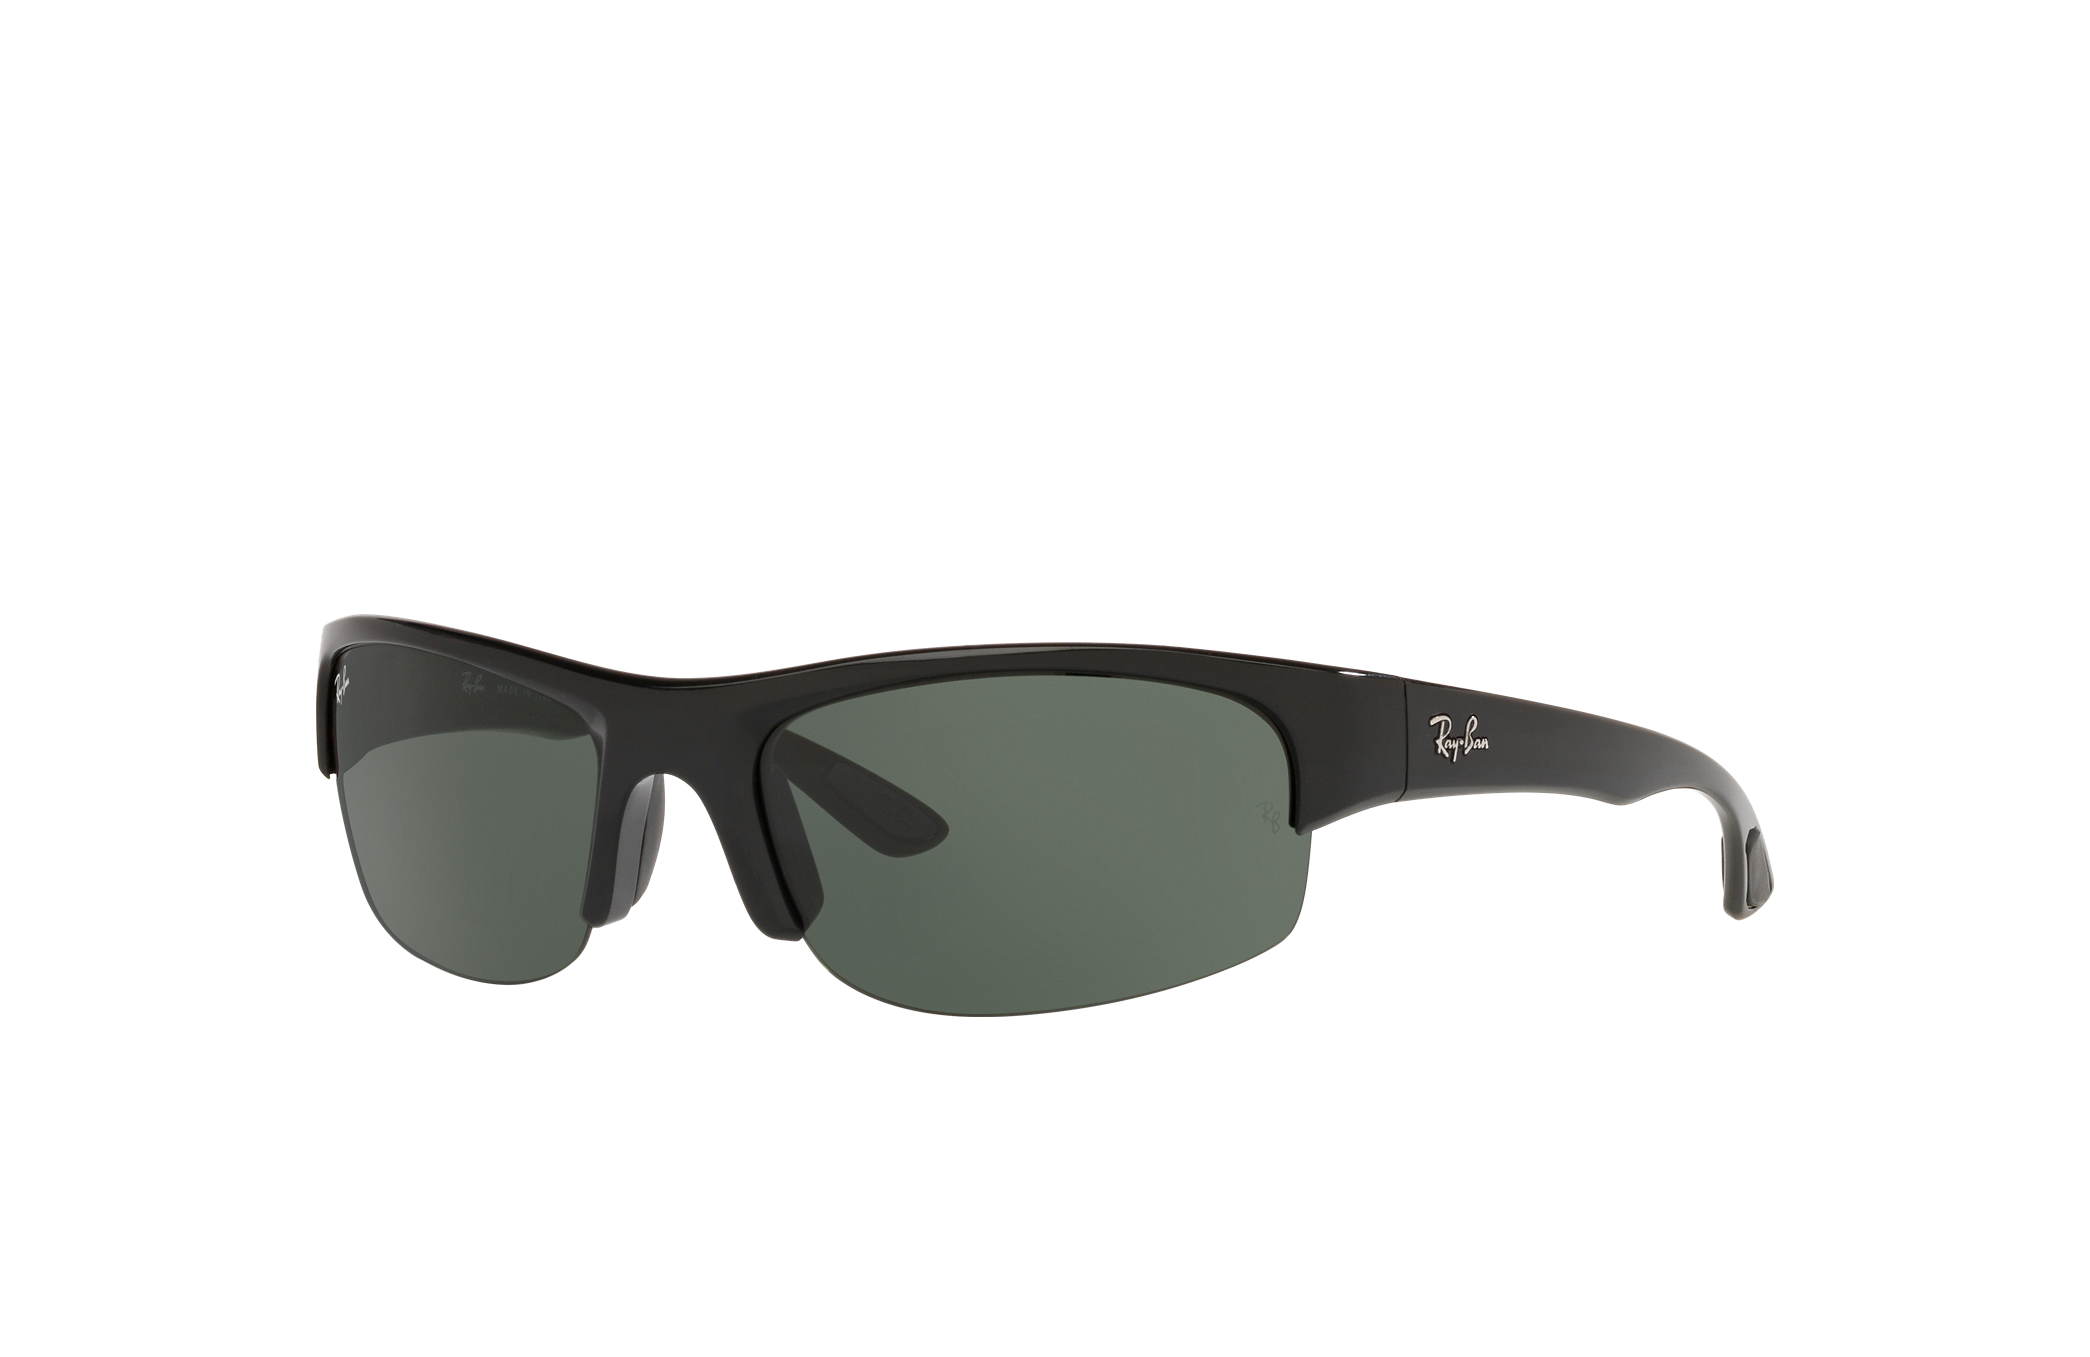 bølge blur Fahrenheit Rb4173 Sunglasses in Black and Green | Ray-Ban®